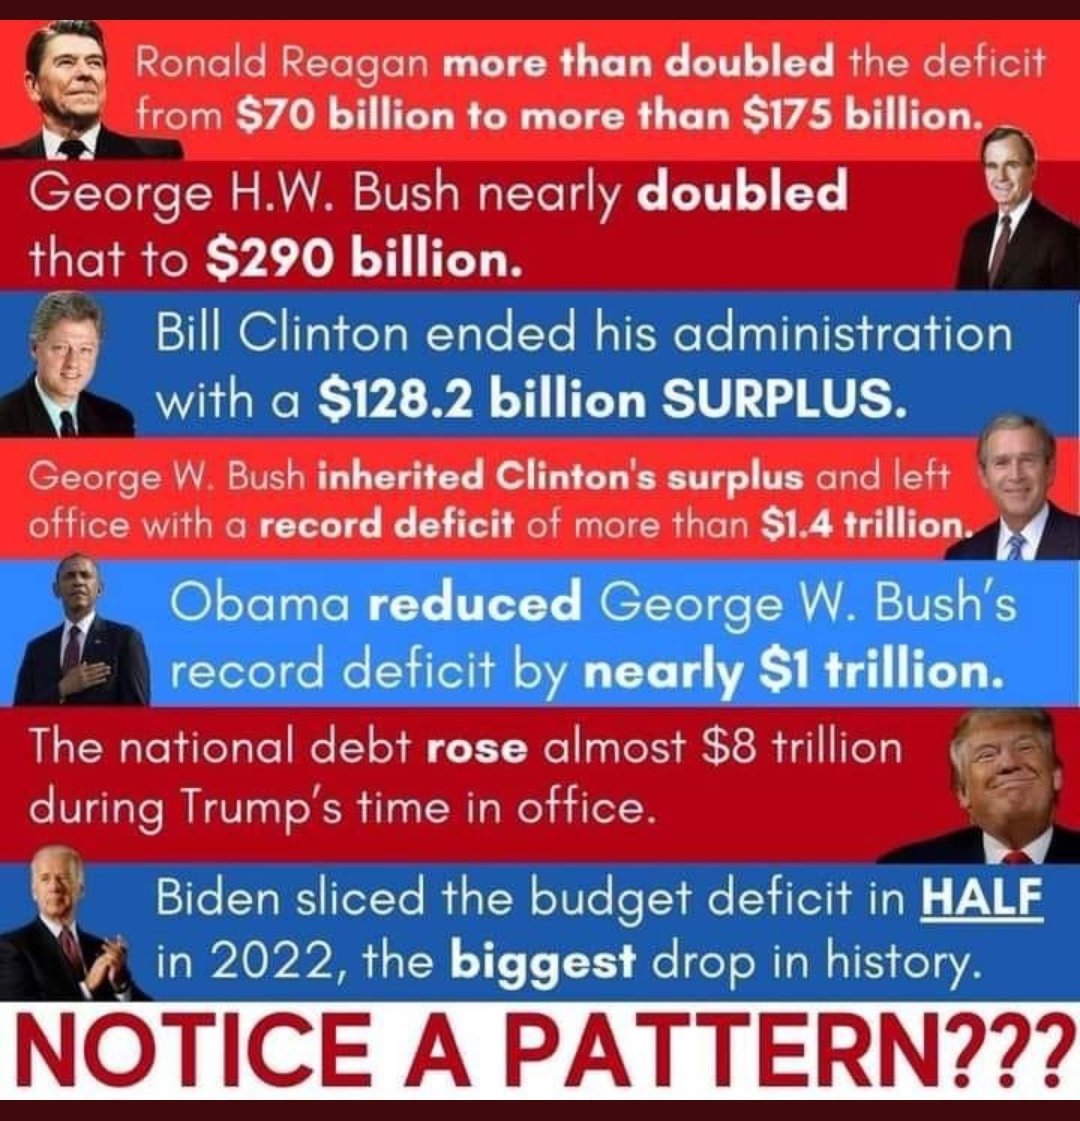 @RepTimmons 25% of the core national debt was established by Republicans during The Traitor Trump's administration. It's the standard operating method of the #GOP for the past 40 years. #GOPClownShowContinues